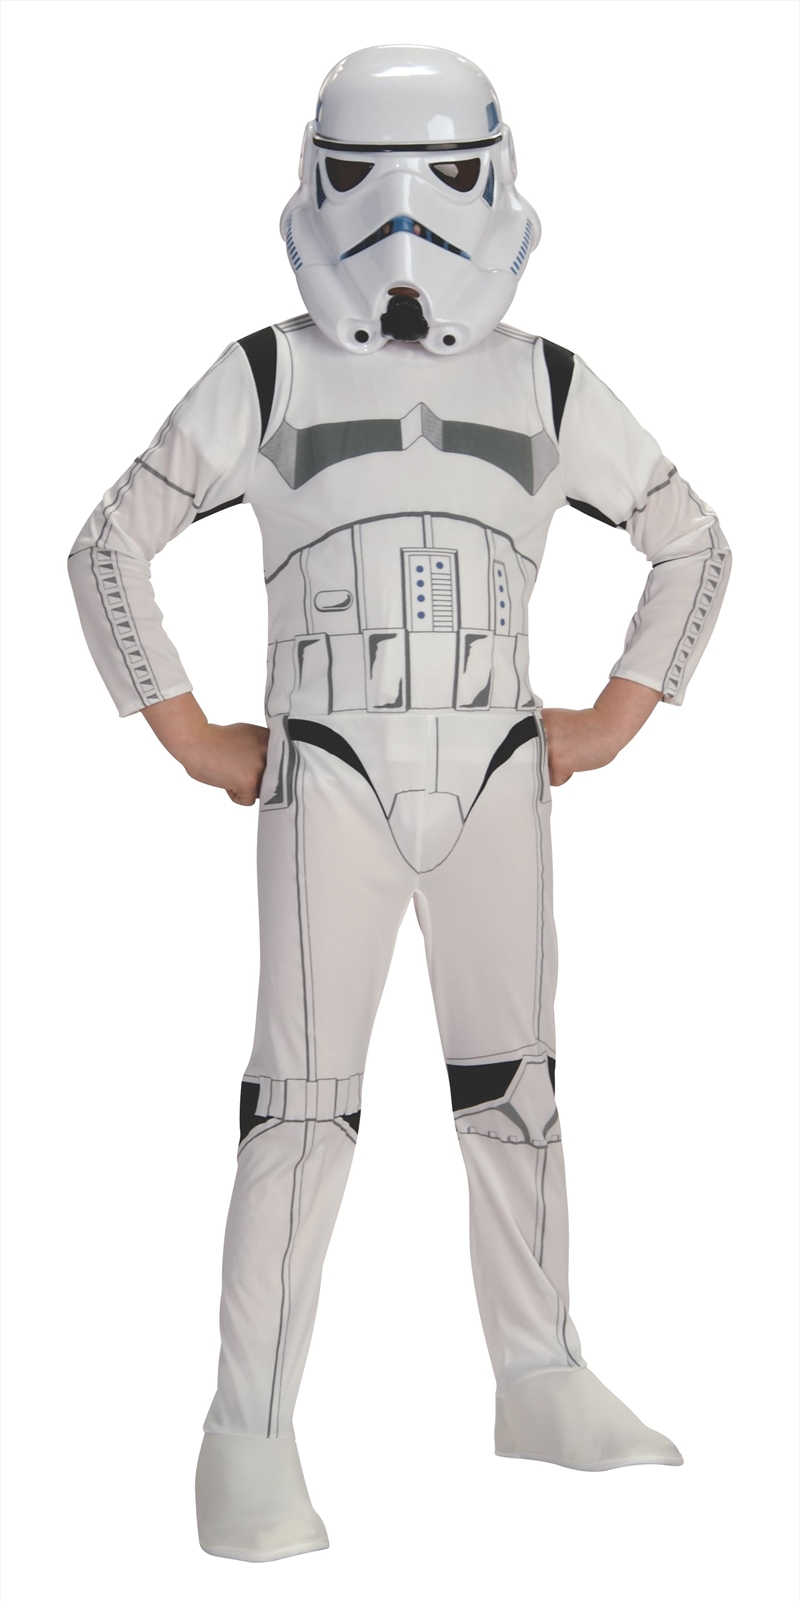 Stormtrooper Deluxe Costume - Size L/Product Detail/Costumes